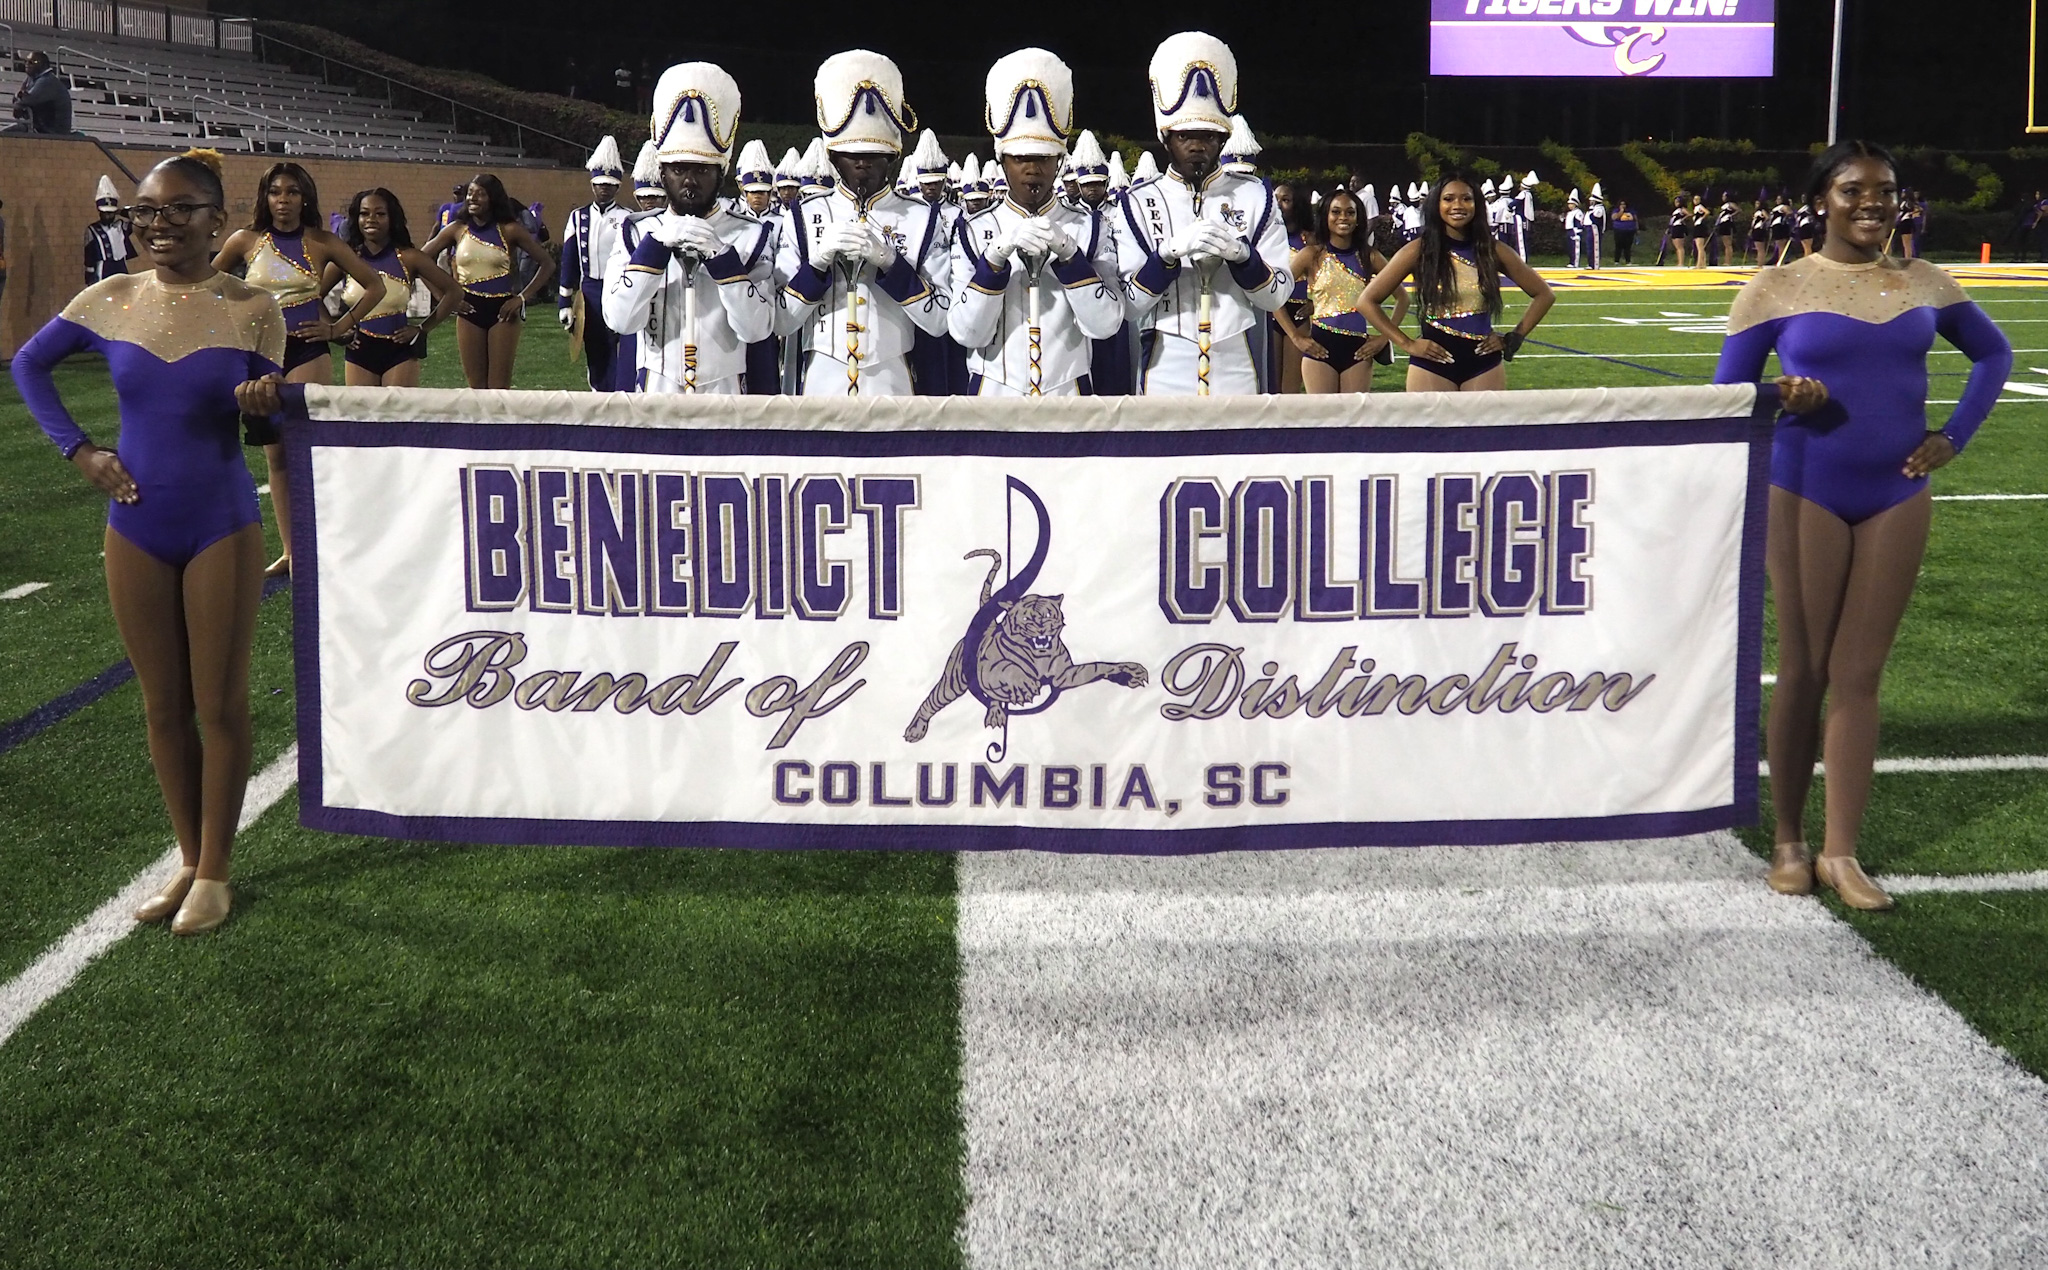 Benedict College Marching Tiger Band of Distinction retains Division II top spot